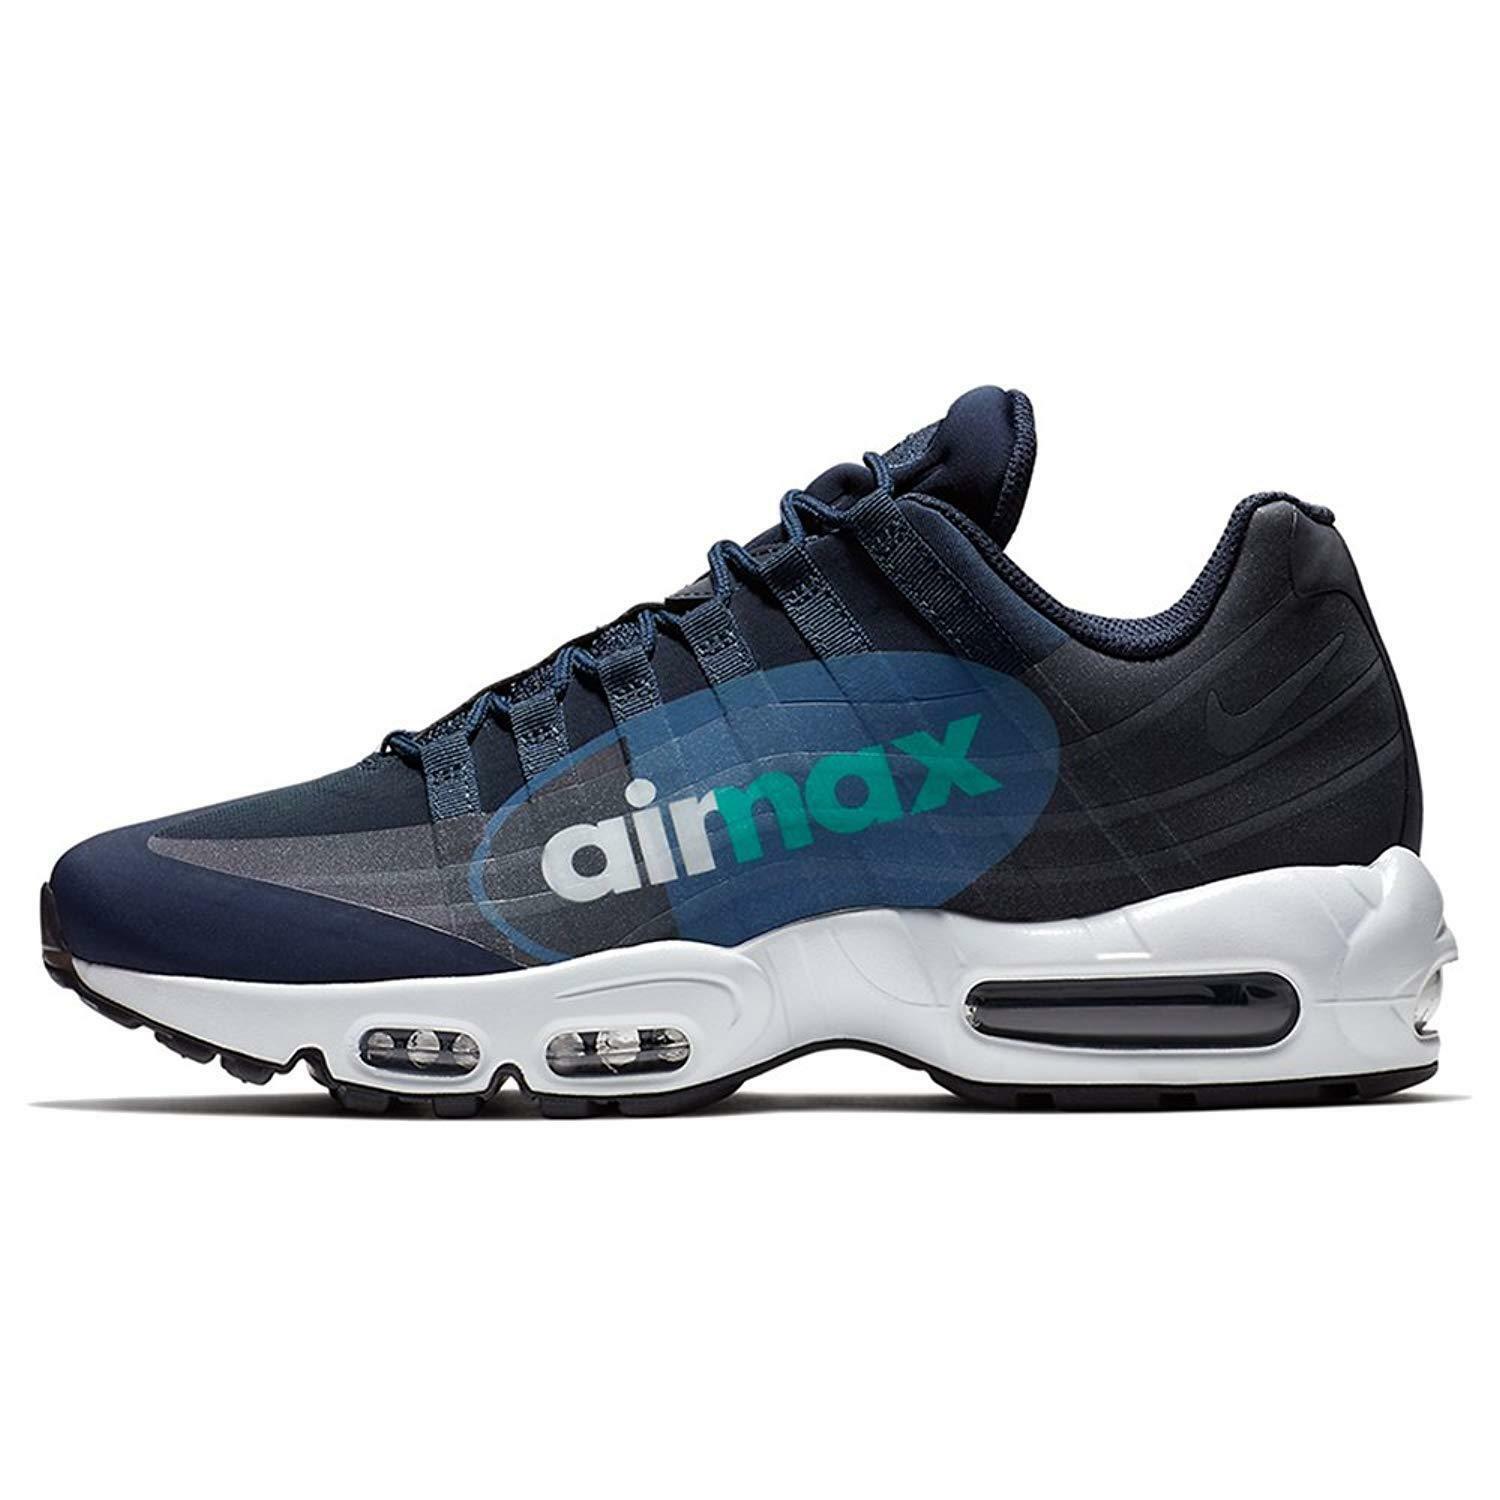 NIKE Air Max 95 NS GPX Mens Running Trainers Aj7183 Sneakers Shoes - $167.39